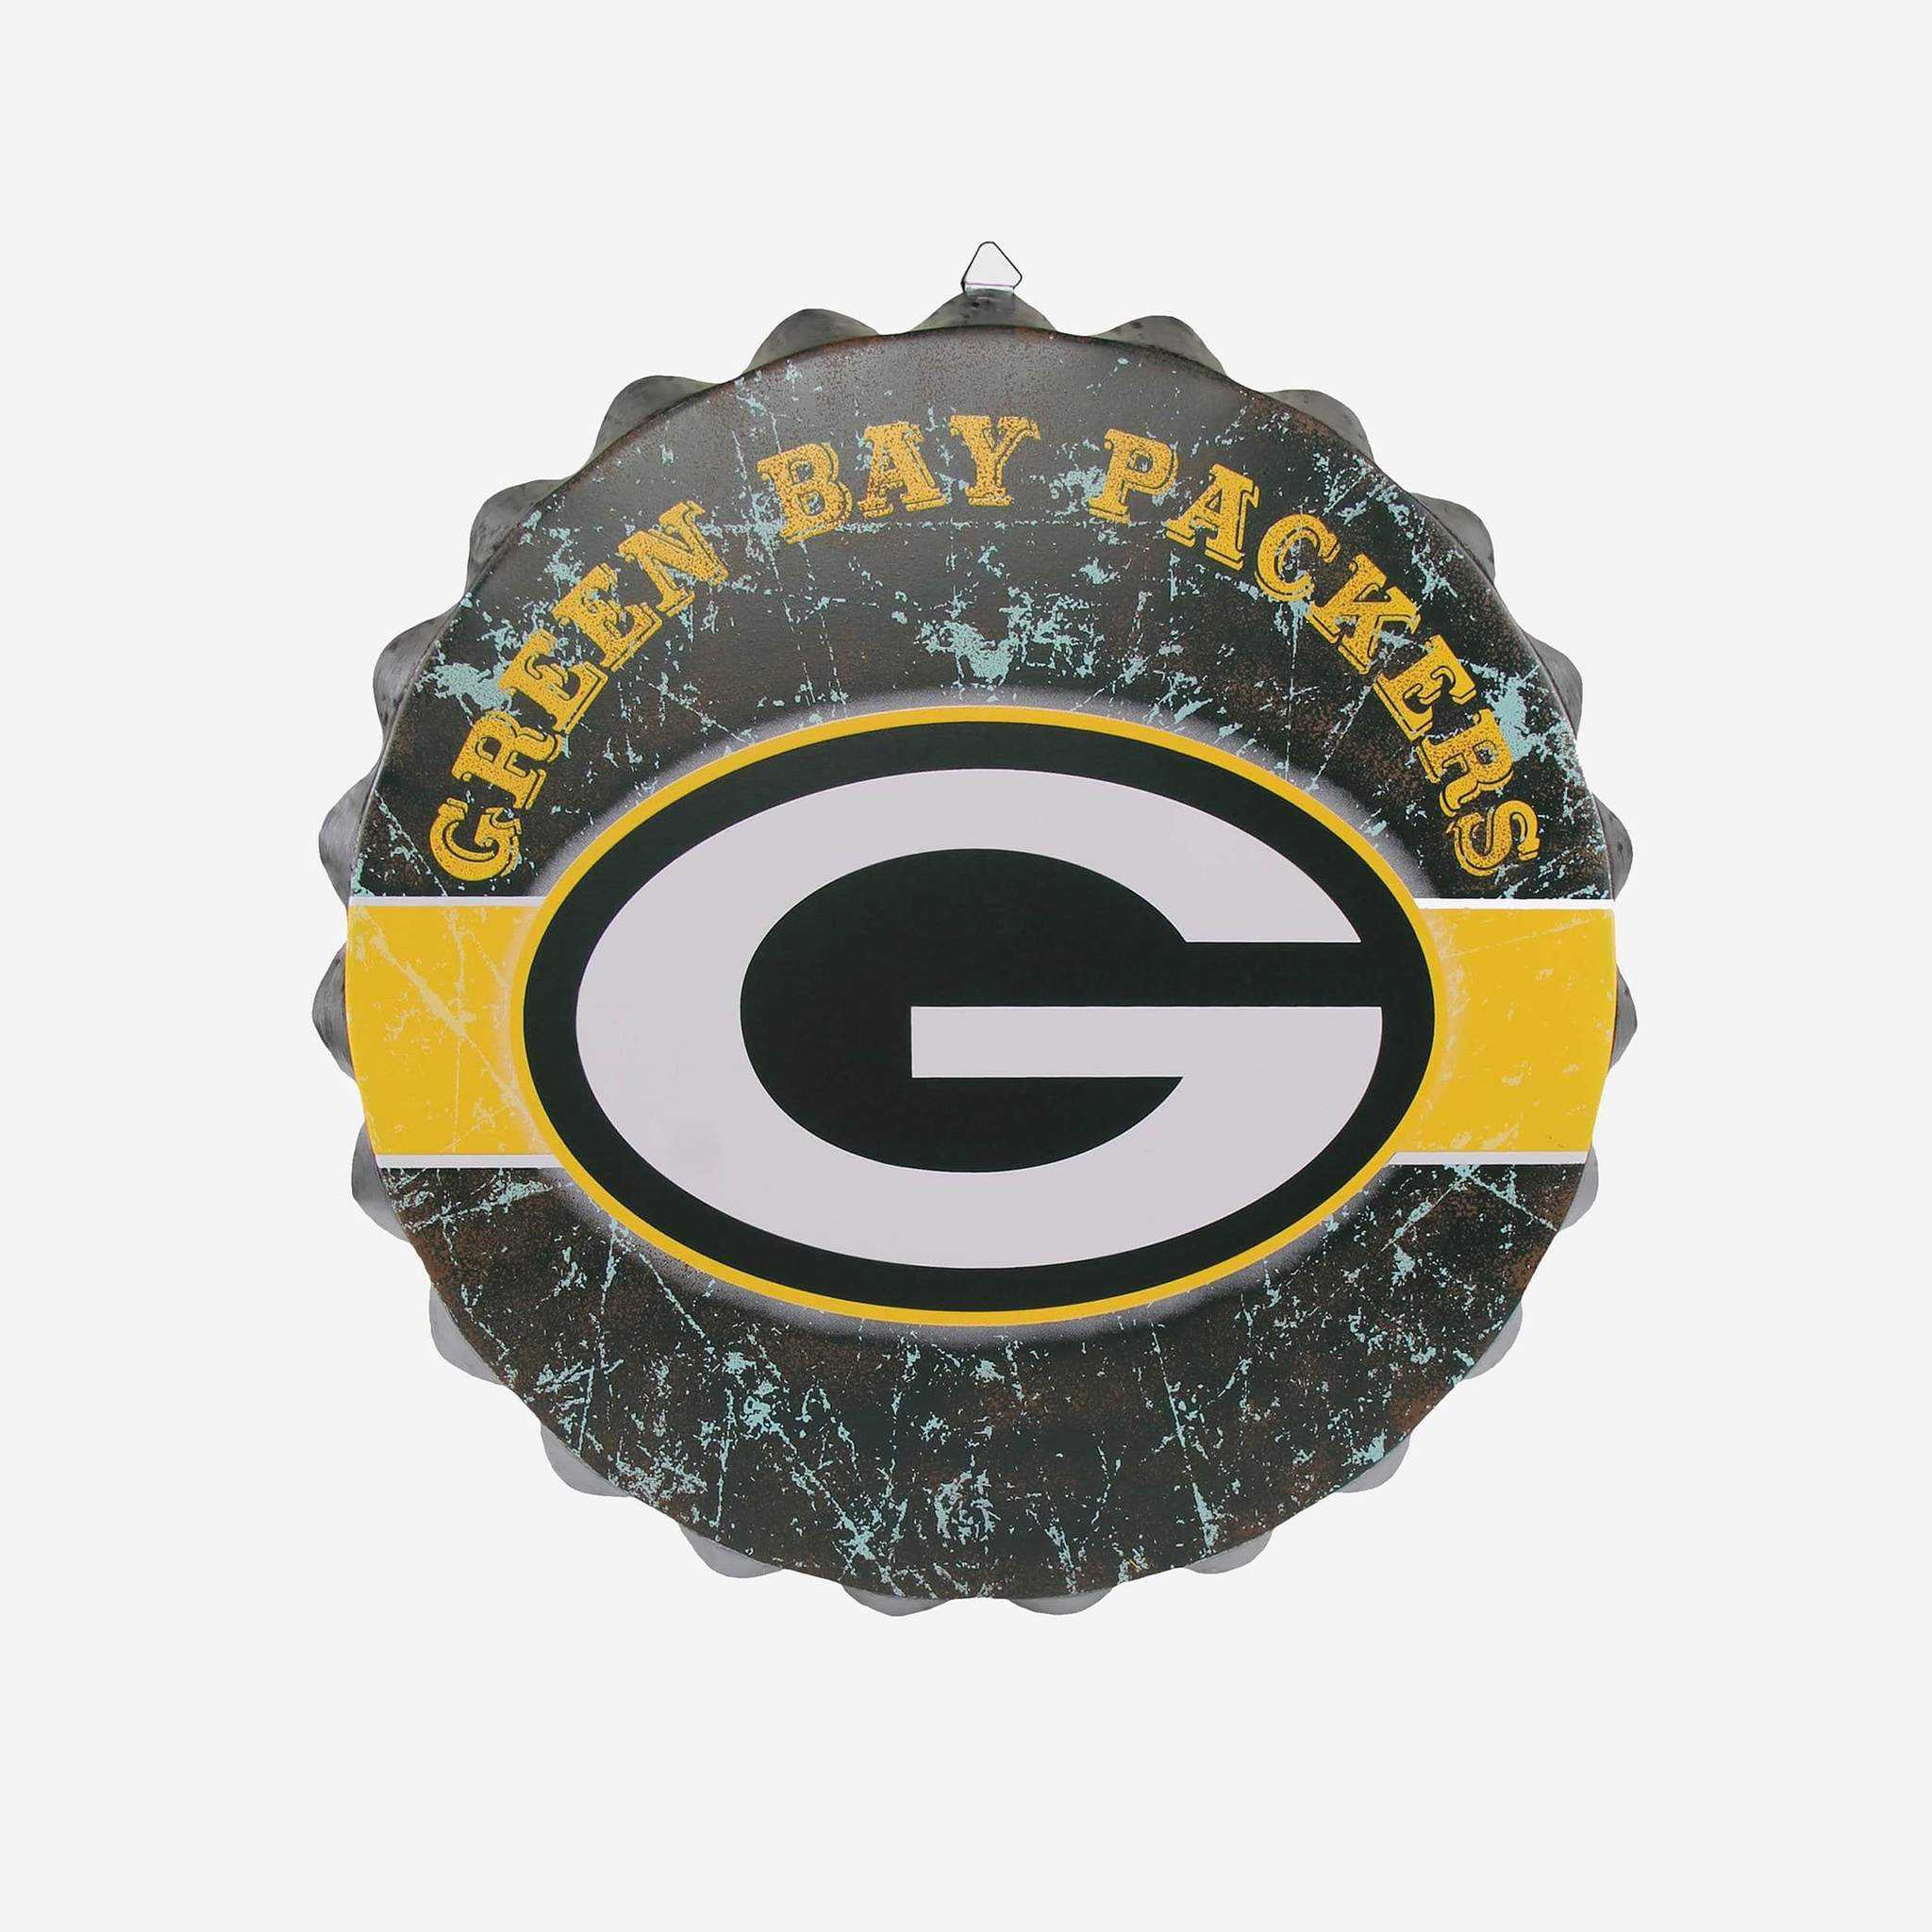 Metal Distressed Bottle Cap Sign-Green Bay Packers